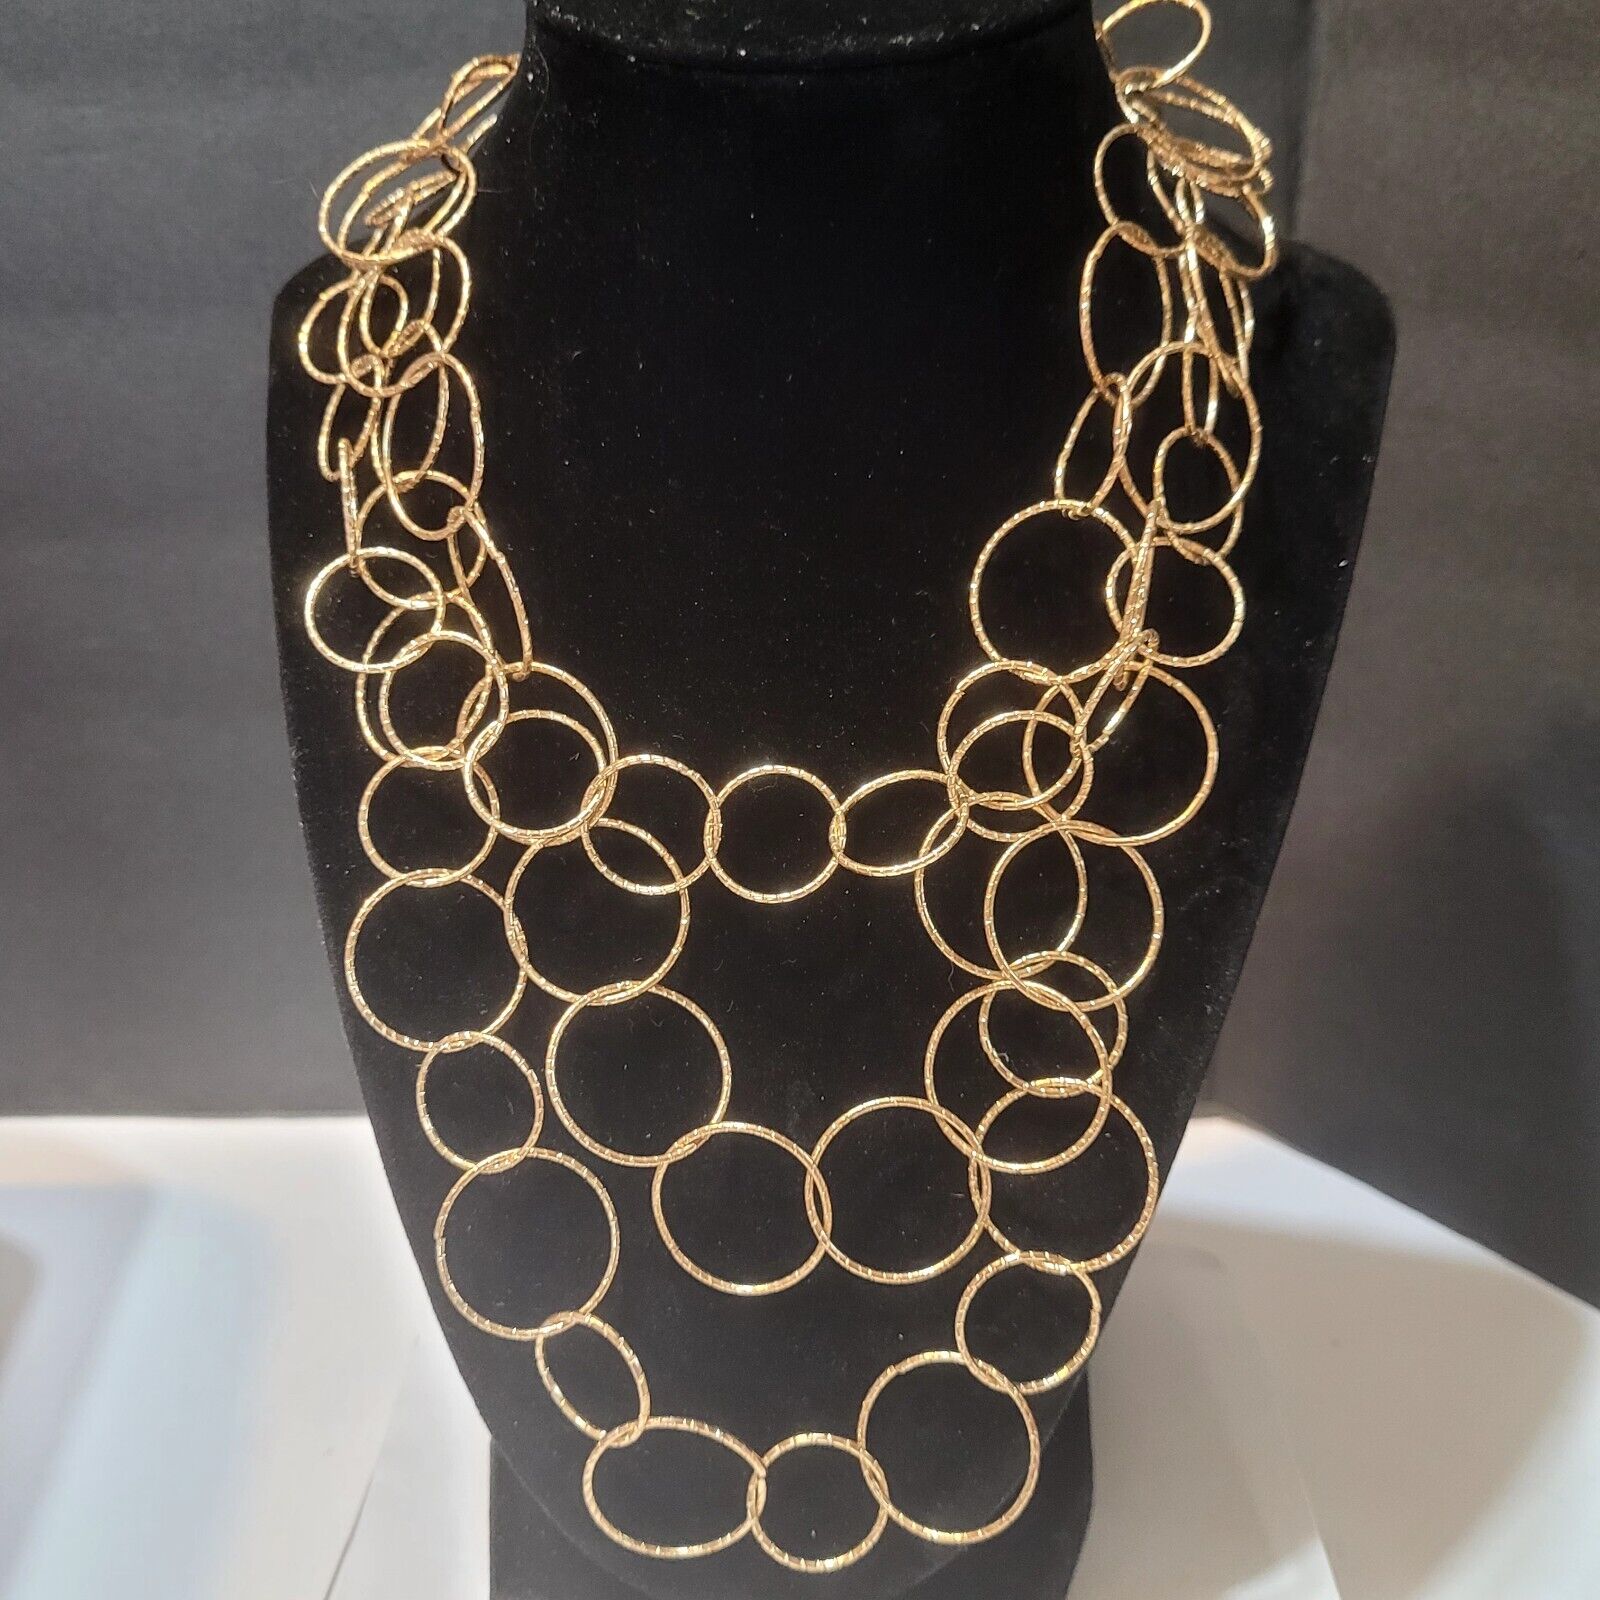 Graduated Multi Circle Chain Link Necklace - image 9